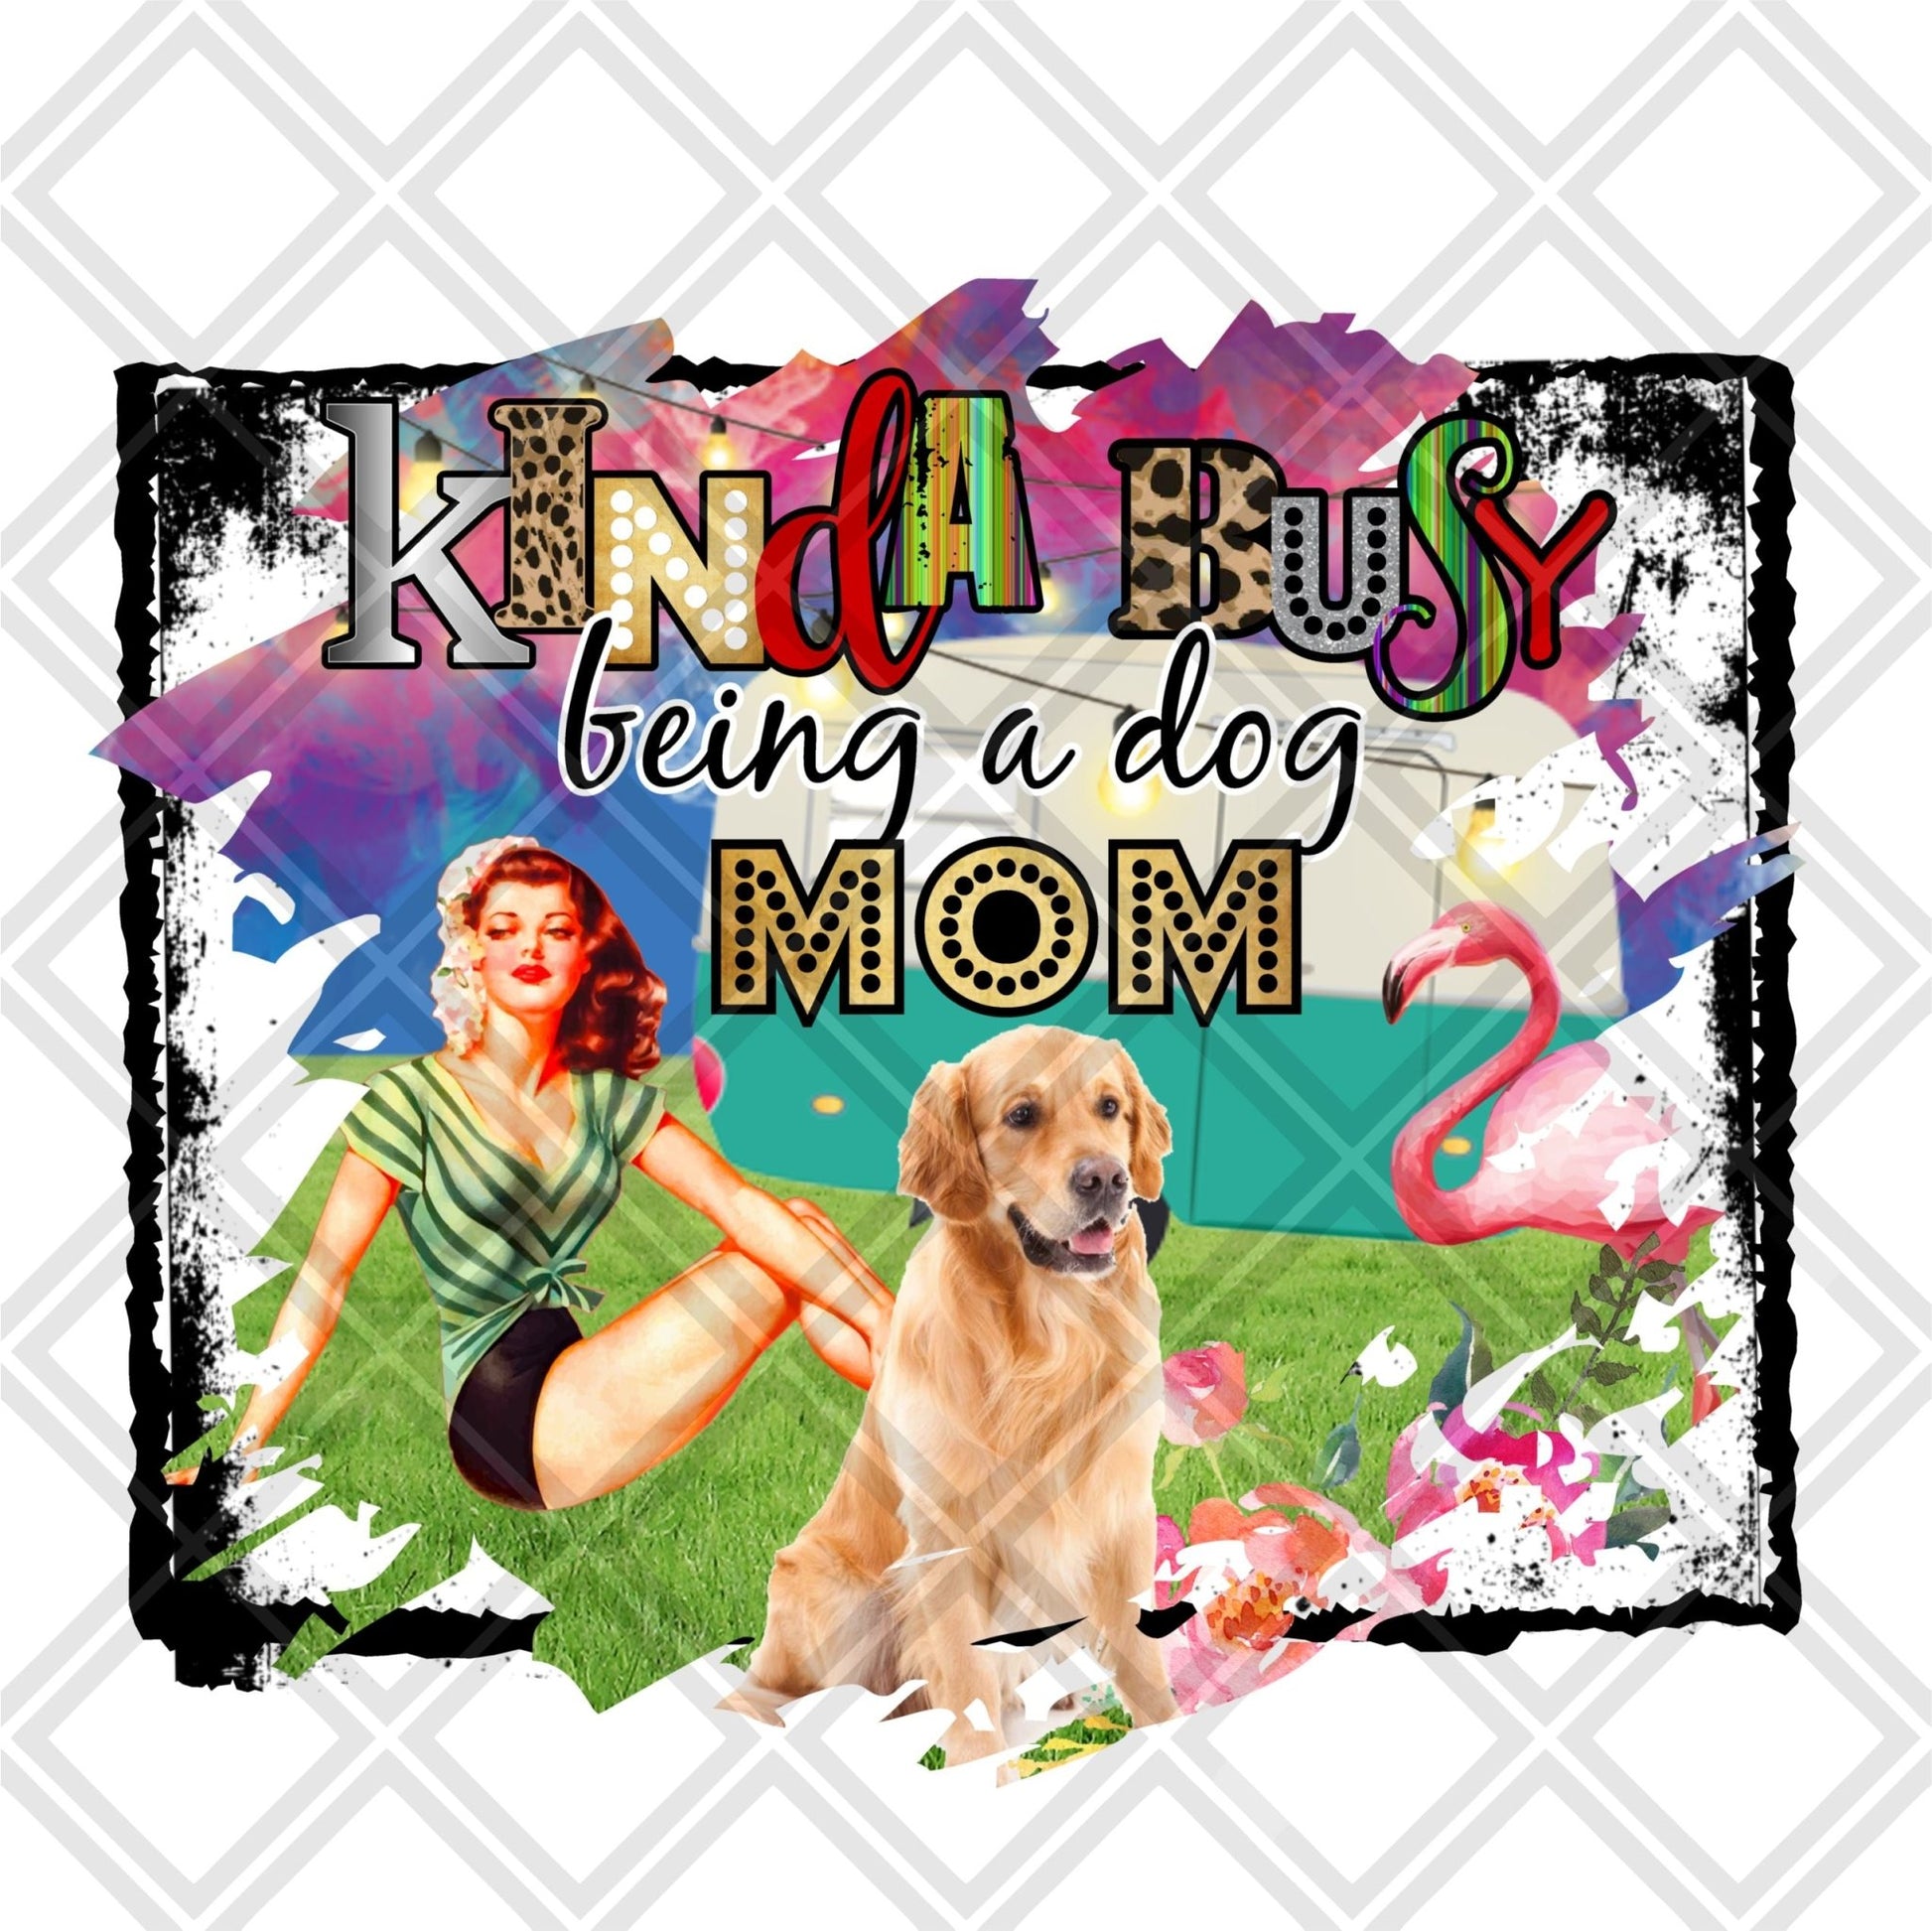 Busy being a dog mom frame FRAME Digital Download Instand Download - Do it yourself Transfers